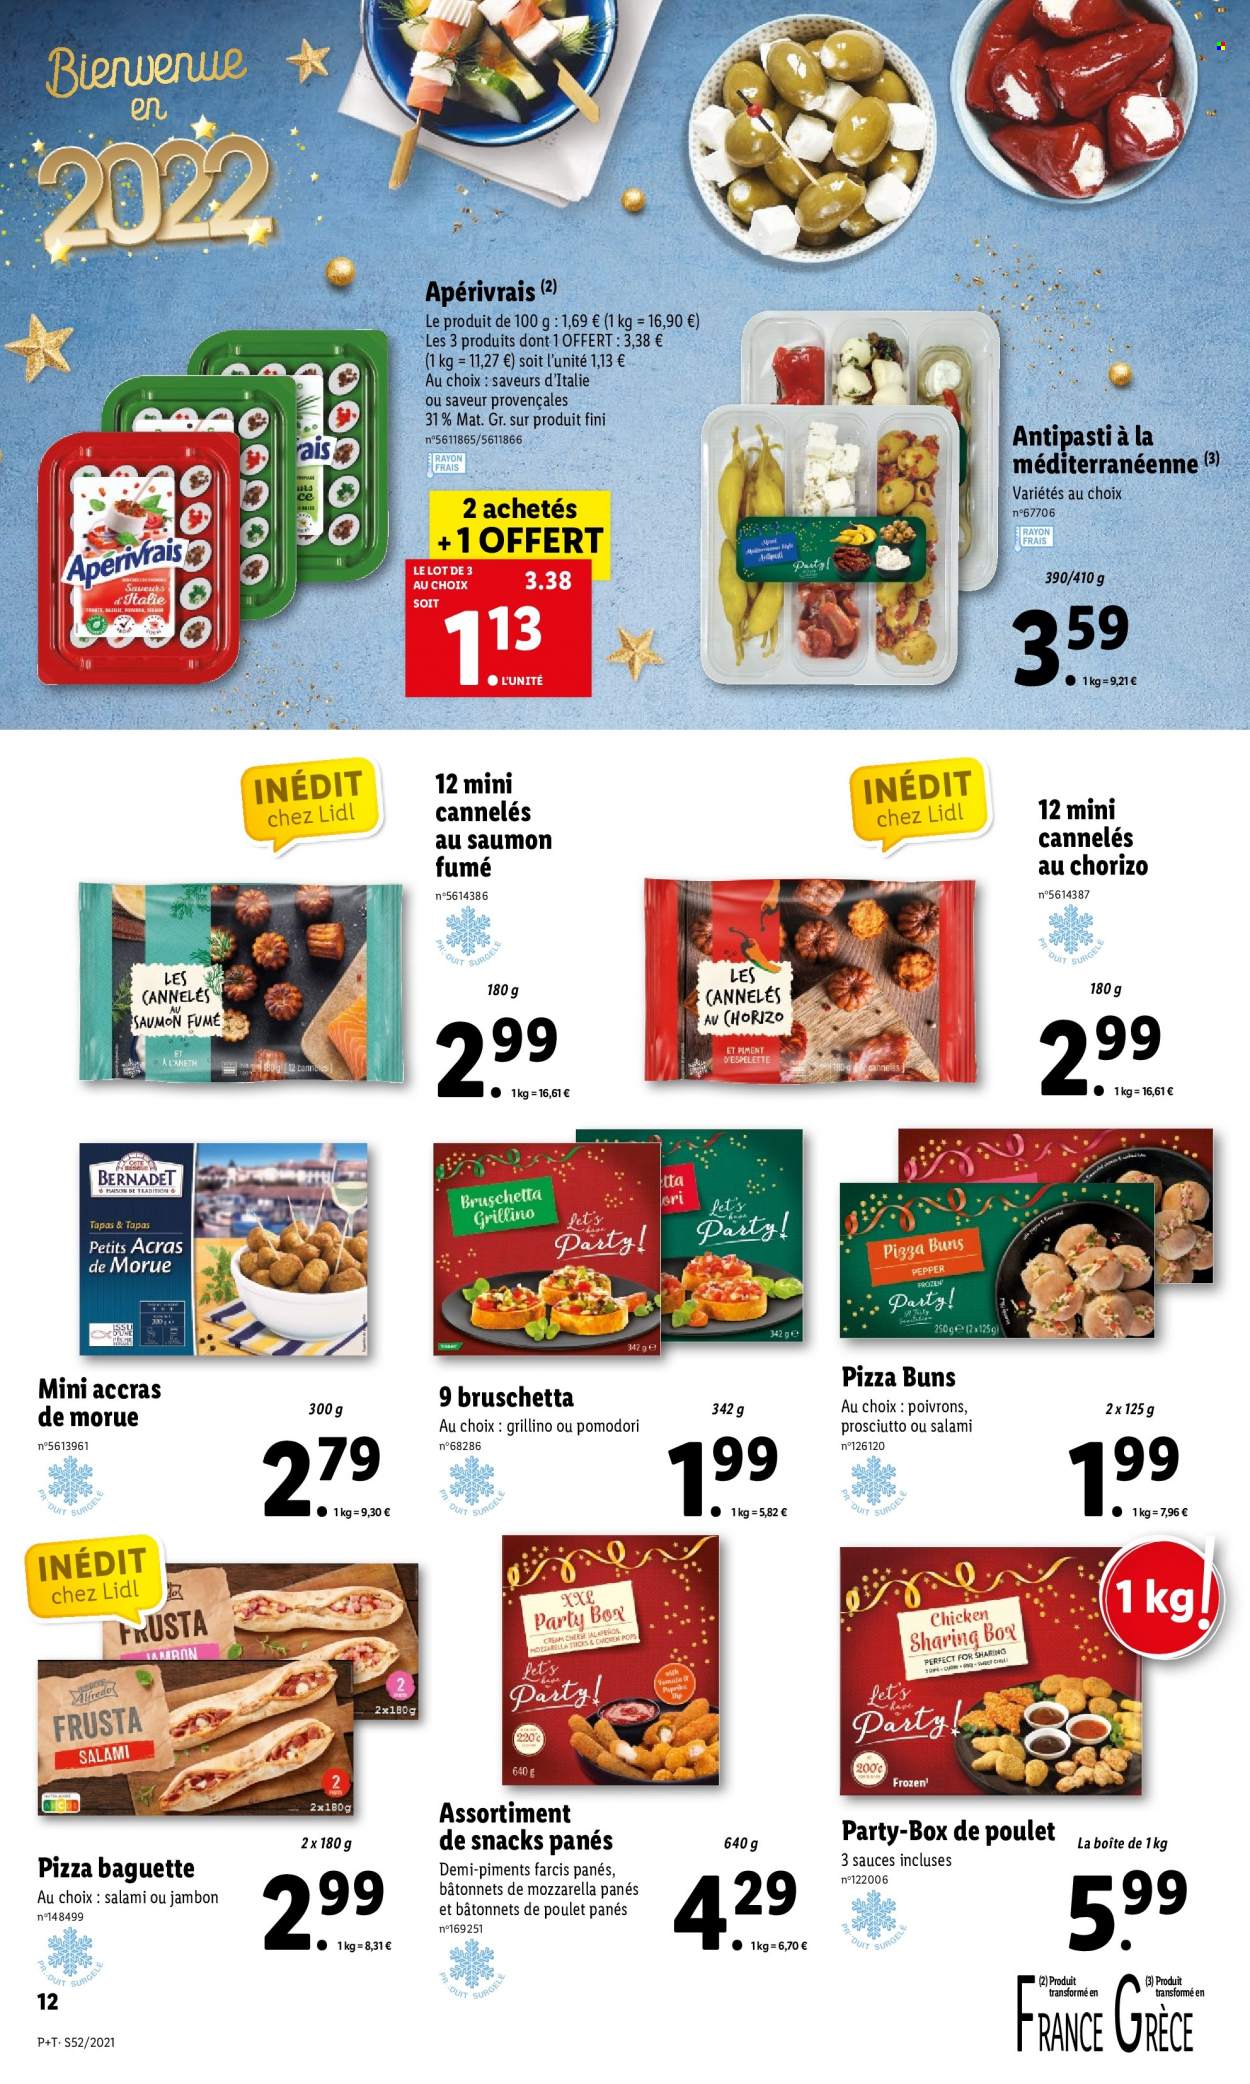 Catalogue Lidl - 29.12.2021 - 04.01.2022. Page 12.